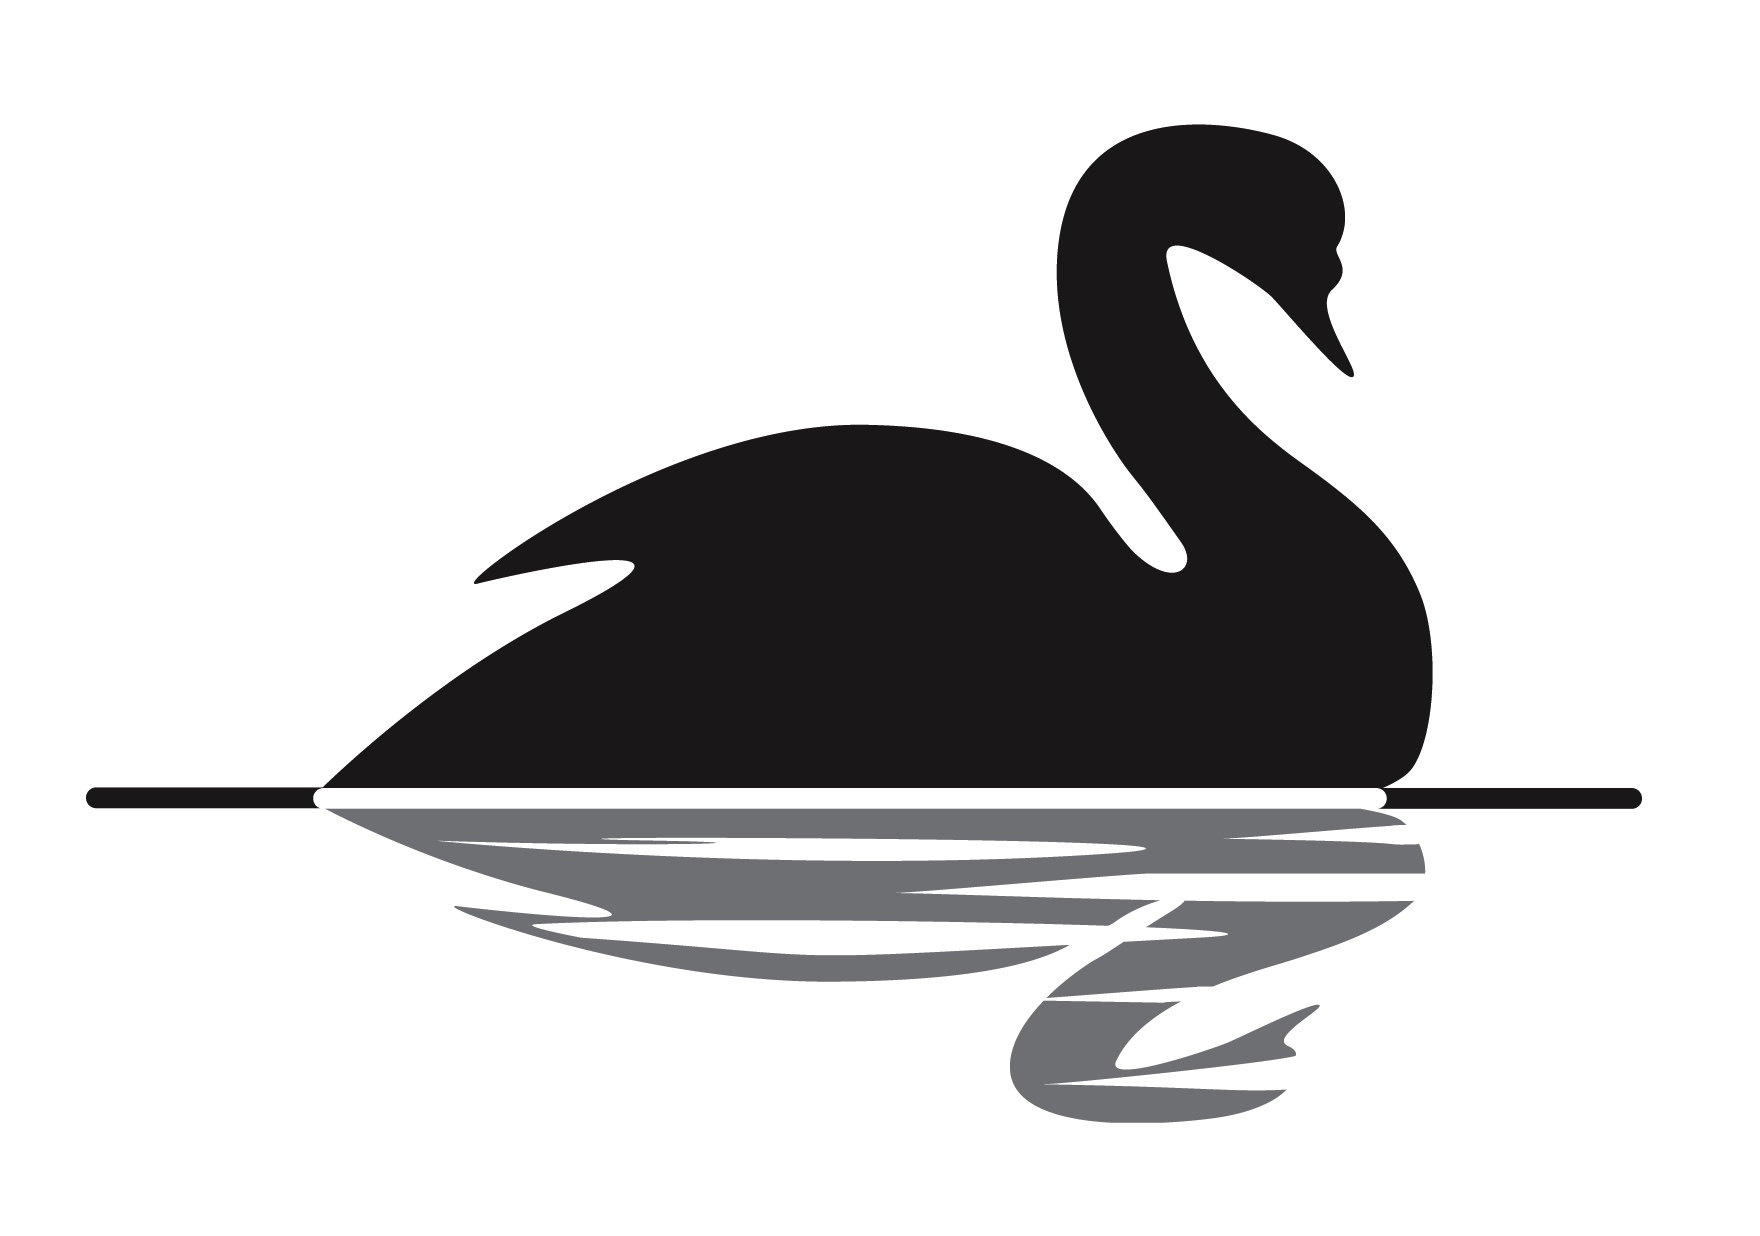 Black Swan in the Stock Market: What Is It, With Examples and History